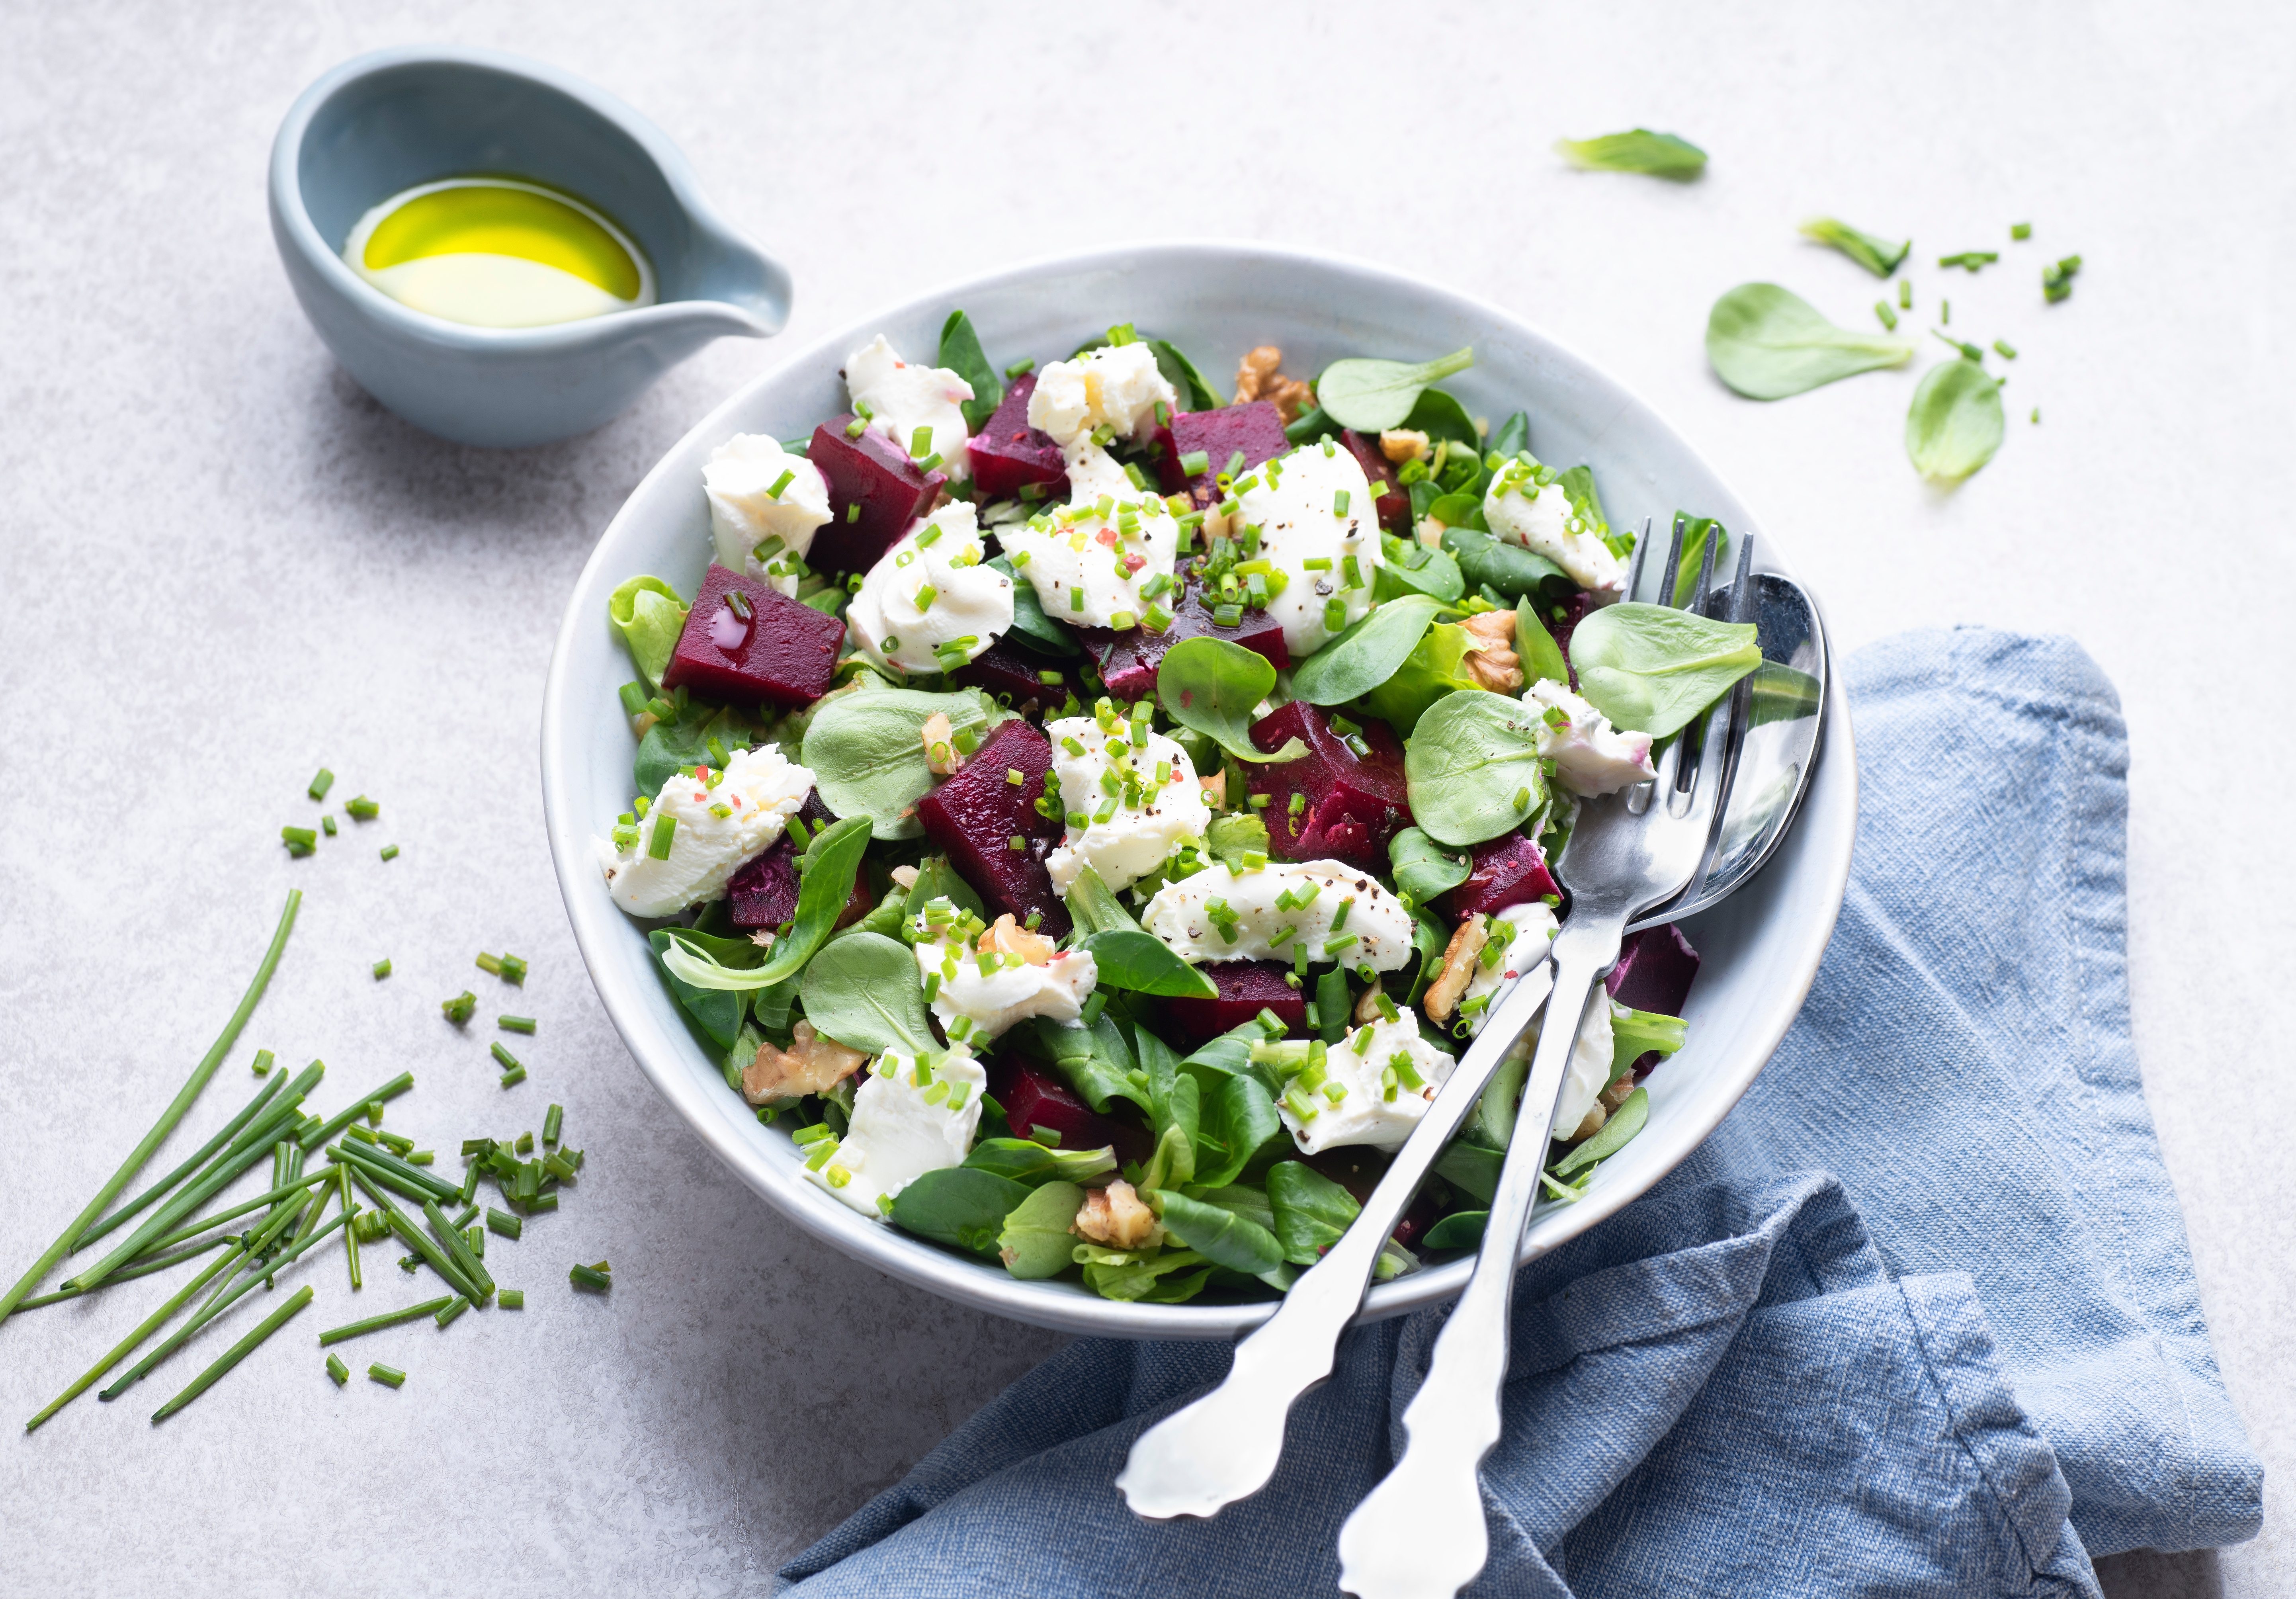 Salad with herbs and olive oil dressing